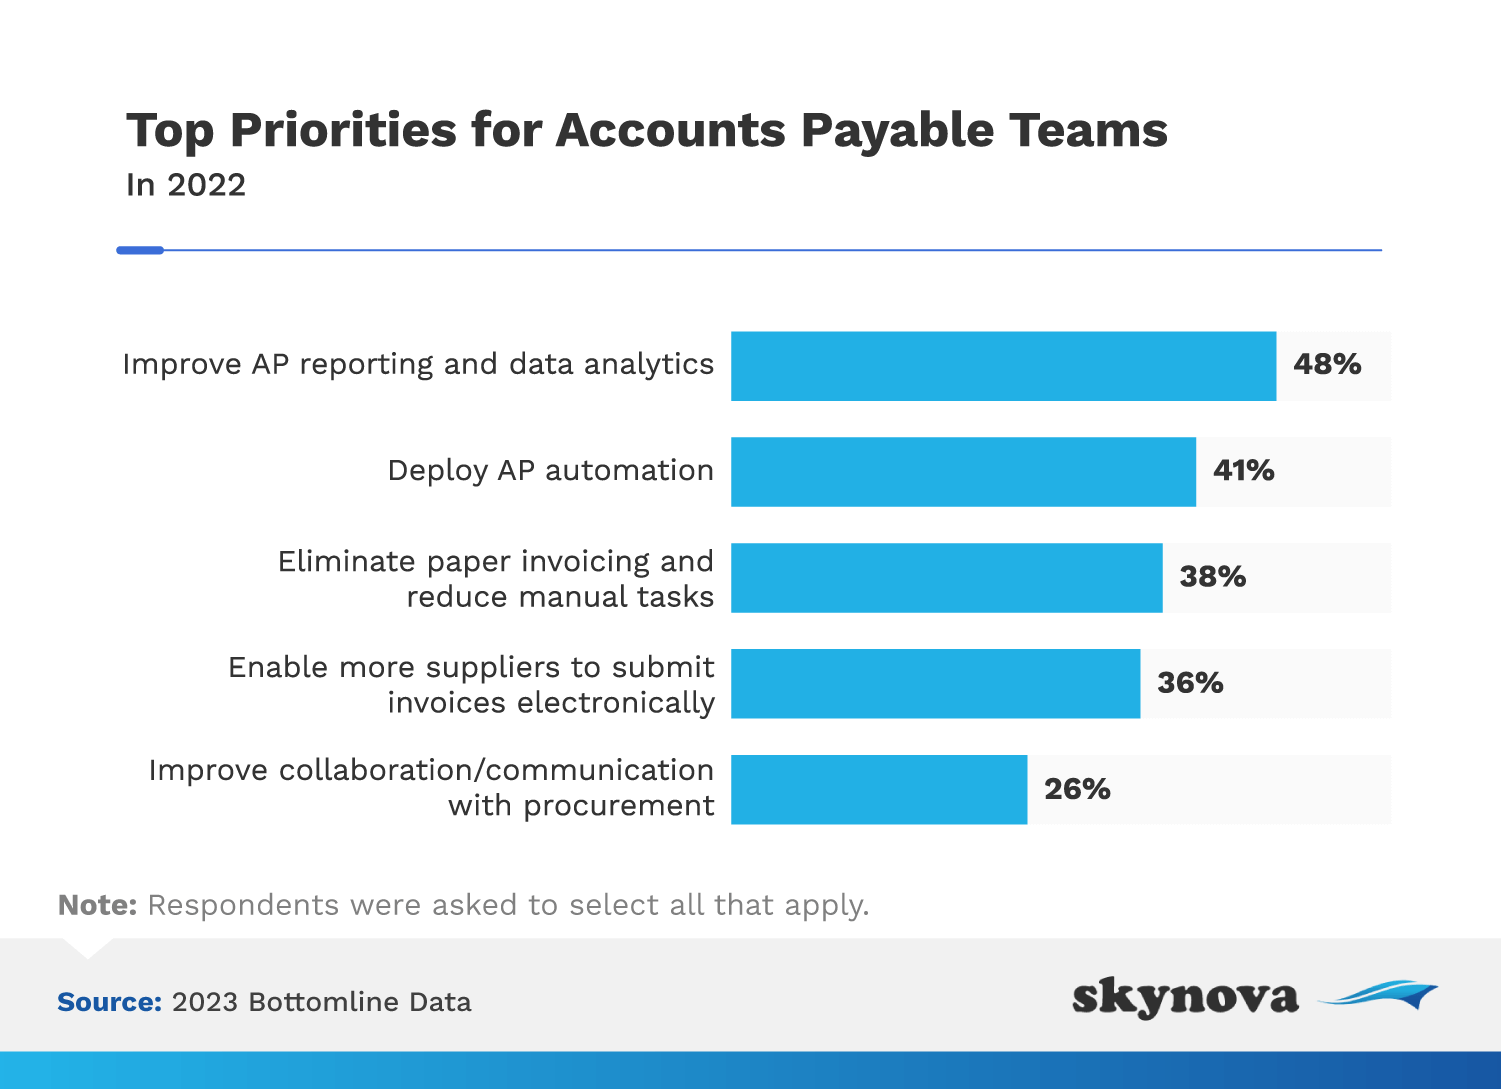 Survey: Top priorities for accounts payable teams